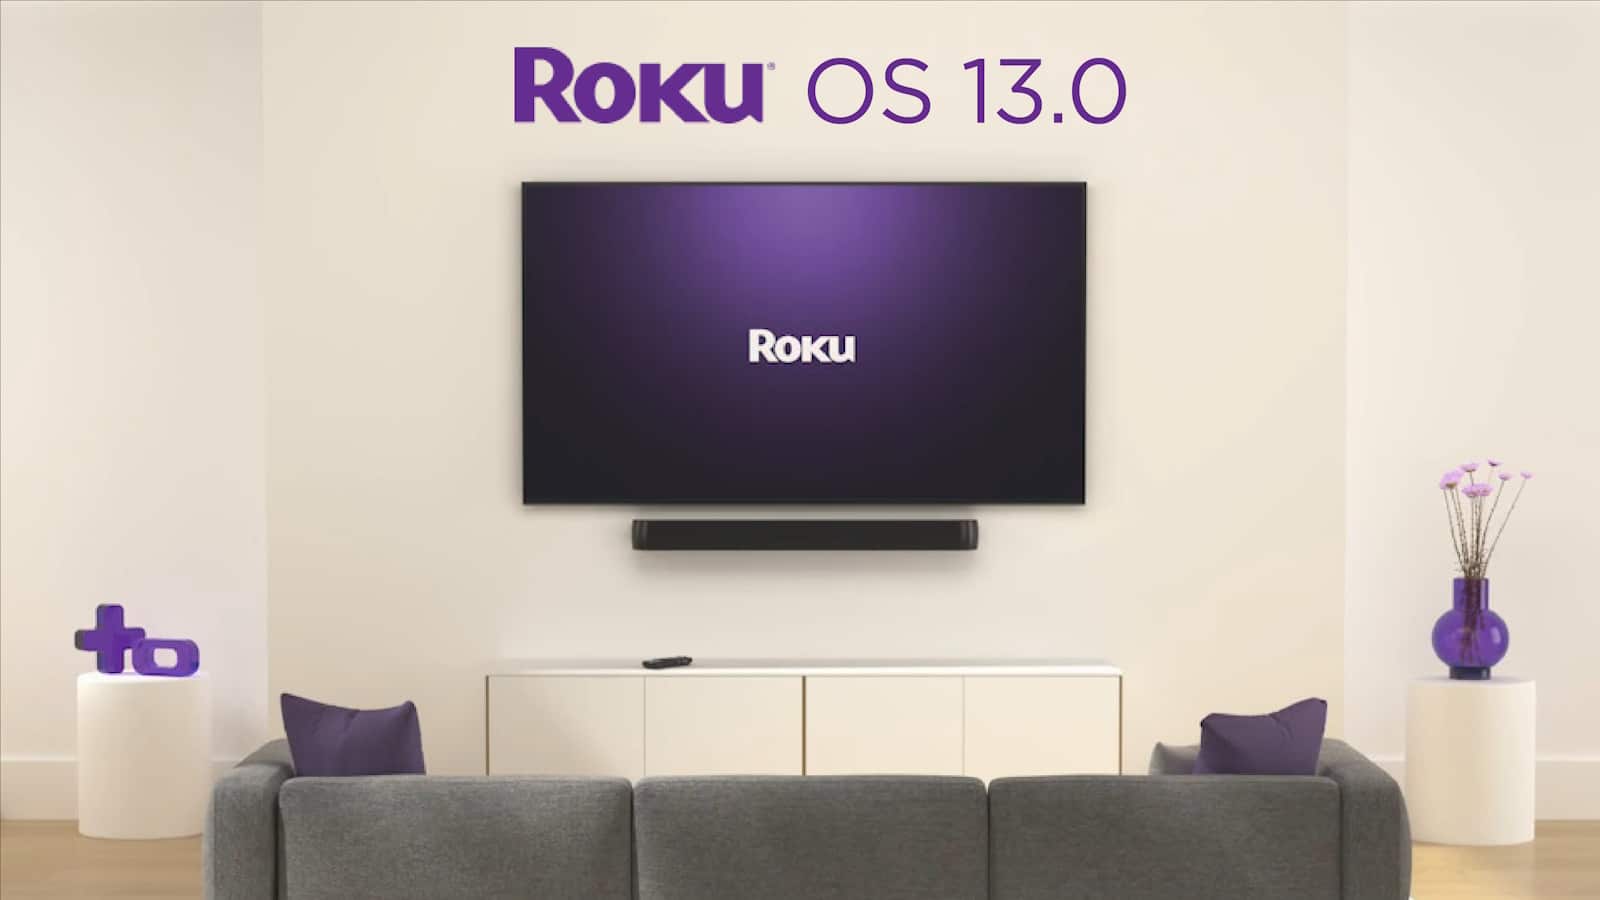 Roku tv on wall with os 13. 0 above